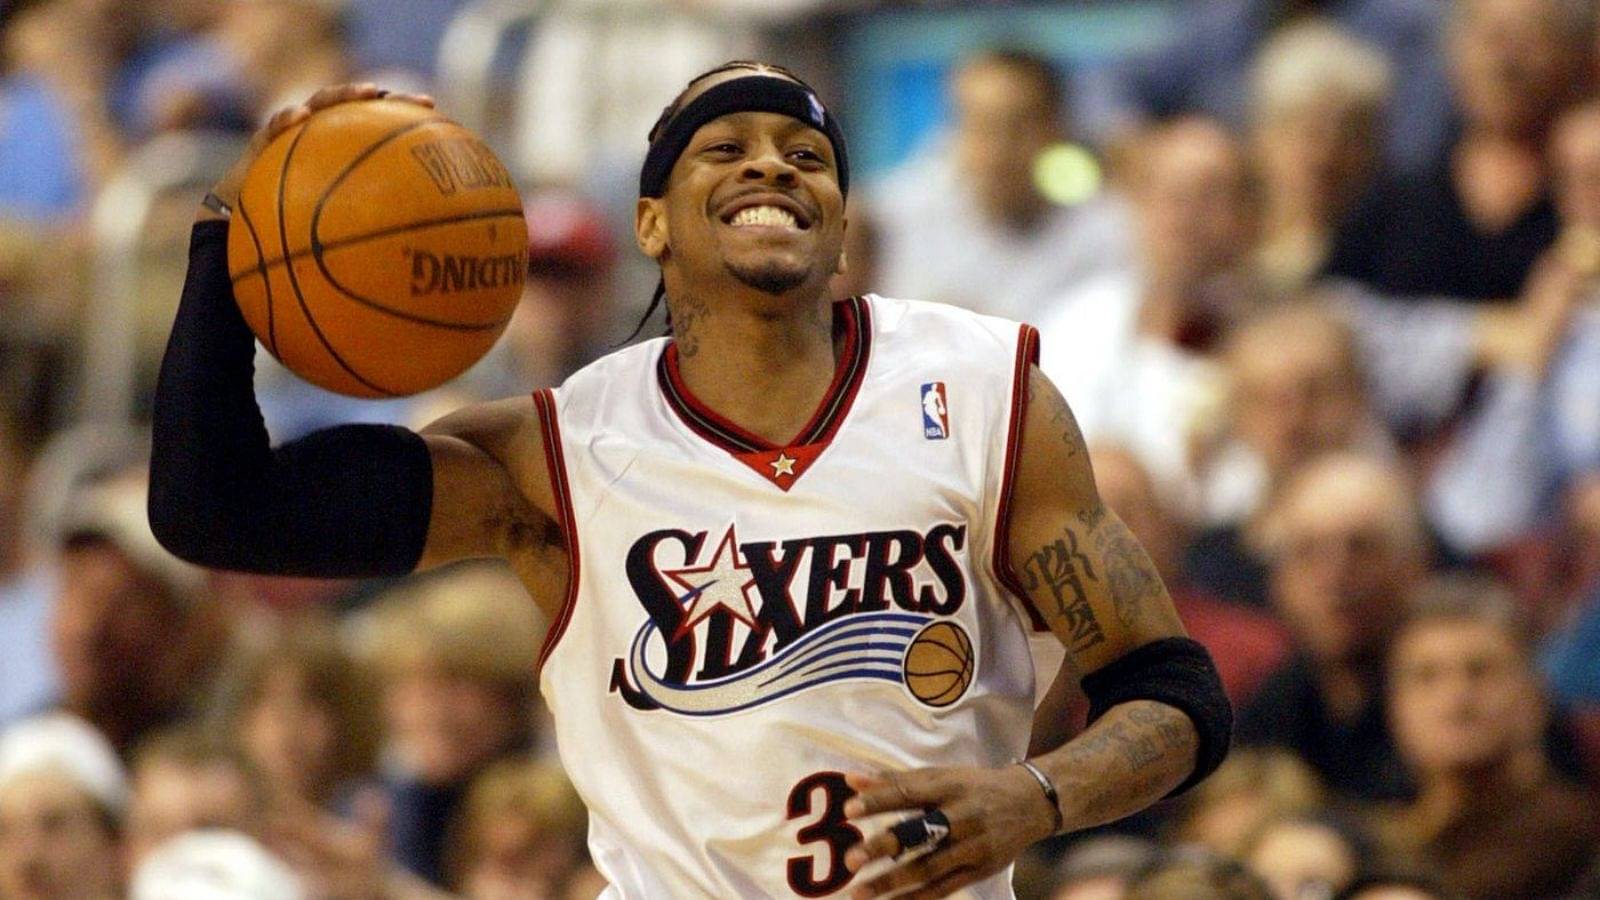 “Tears would flow down my eyes when I passed the football field”: Allen Iverson recalls asking legendary Georgetown coach, John Thompson, permission to play football